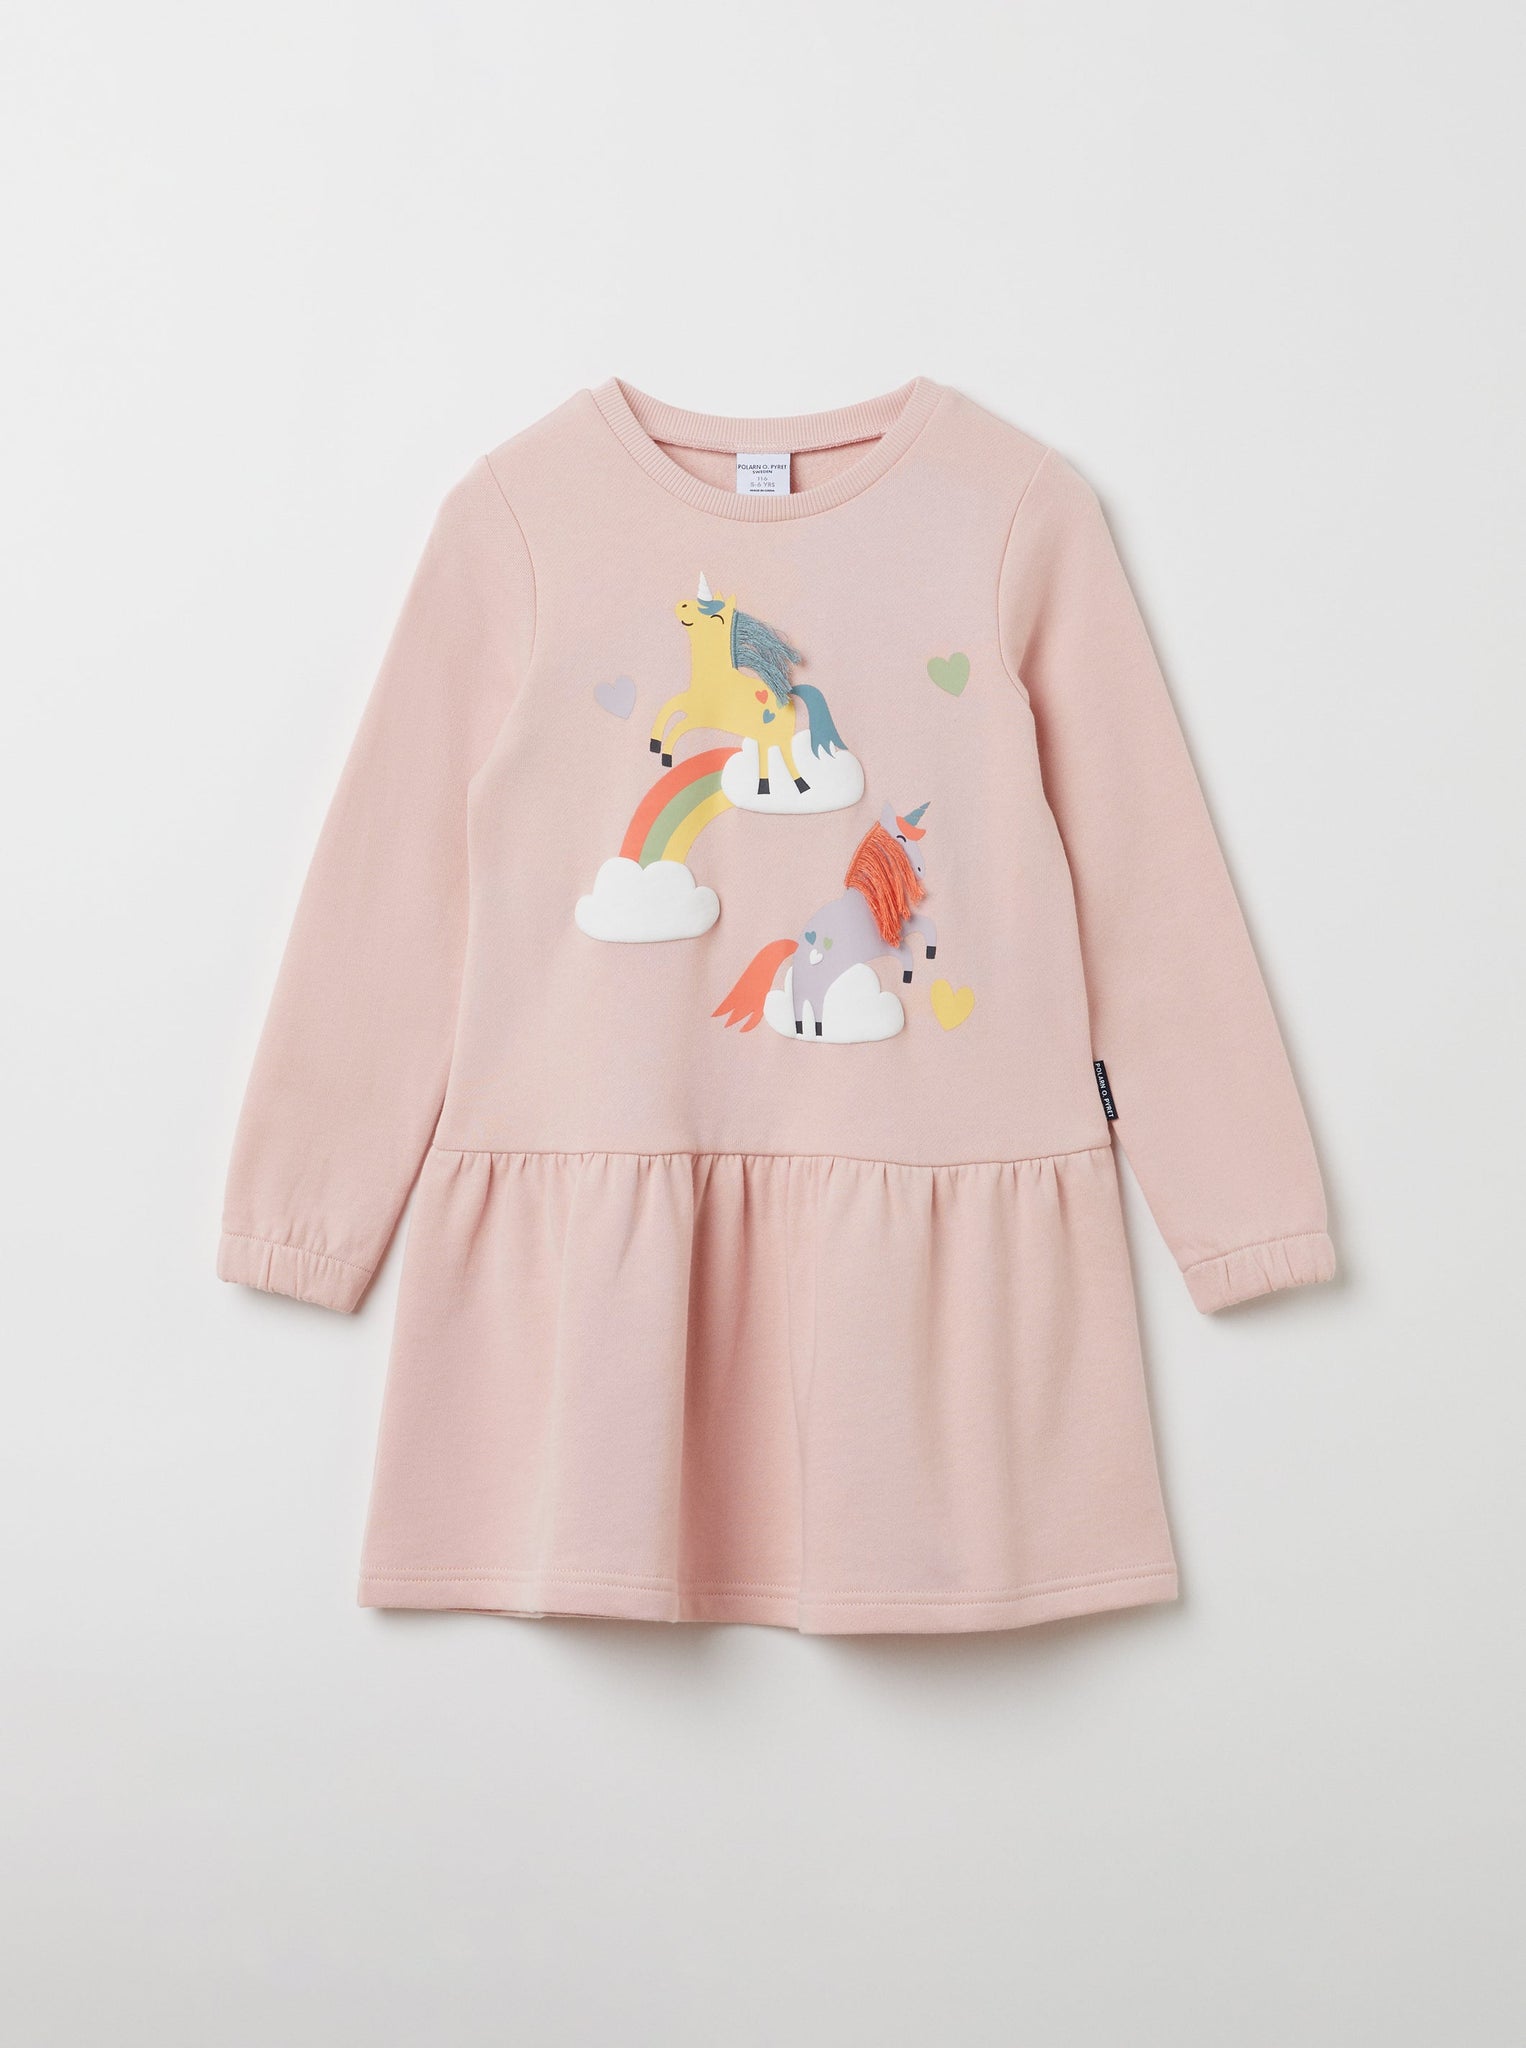 Organic Cotton Pink Unicorn Kids Dress from the Polarn O. Pyret kidswear collection. Clothes made using sustainably sourced materials.